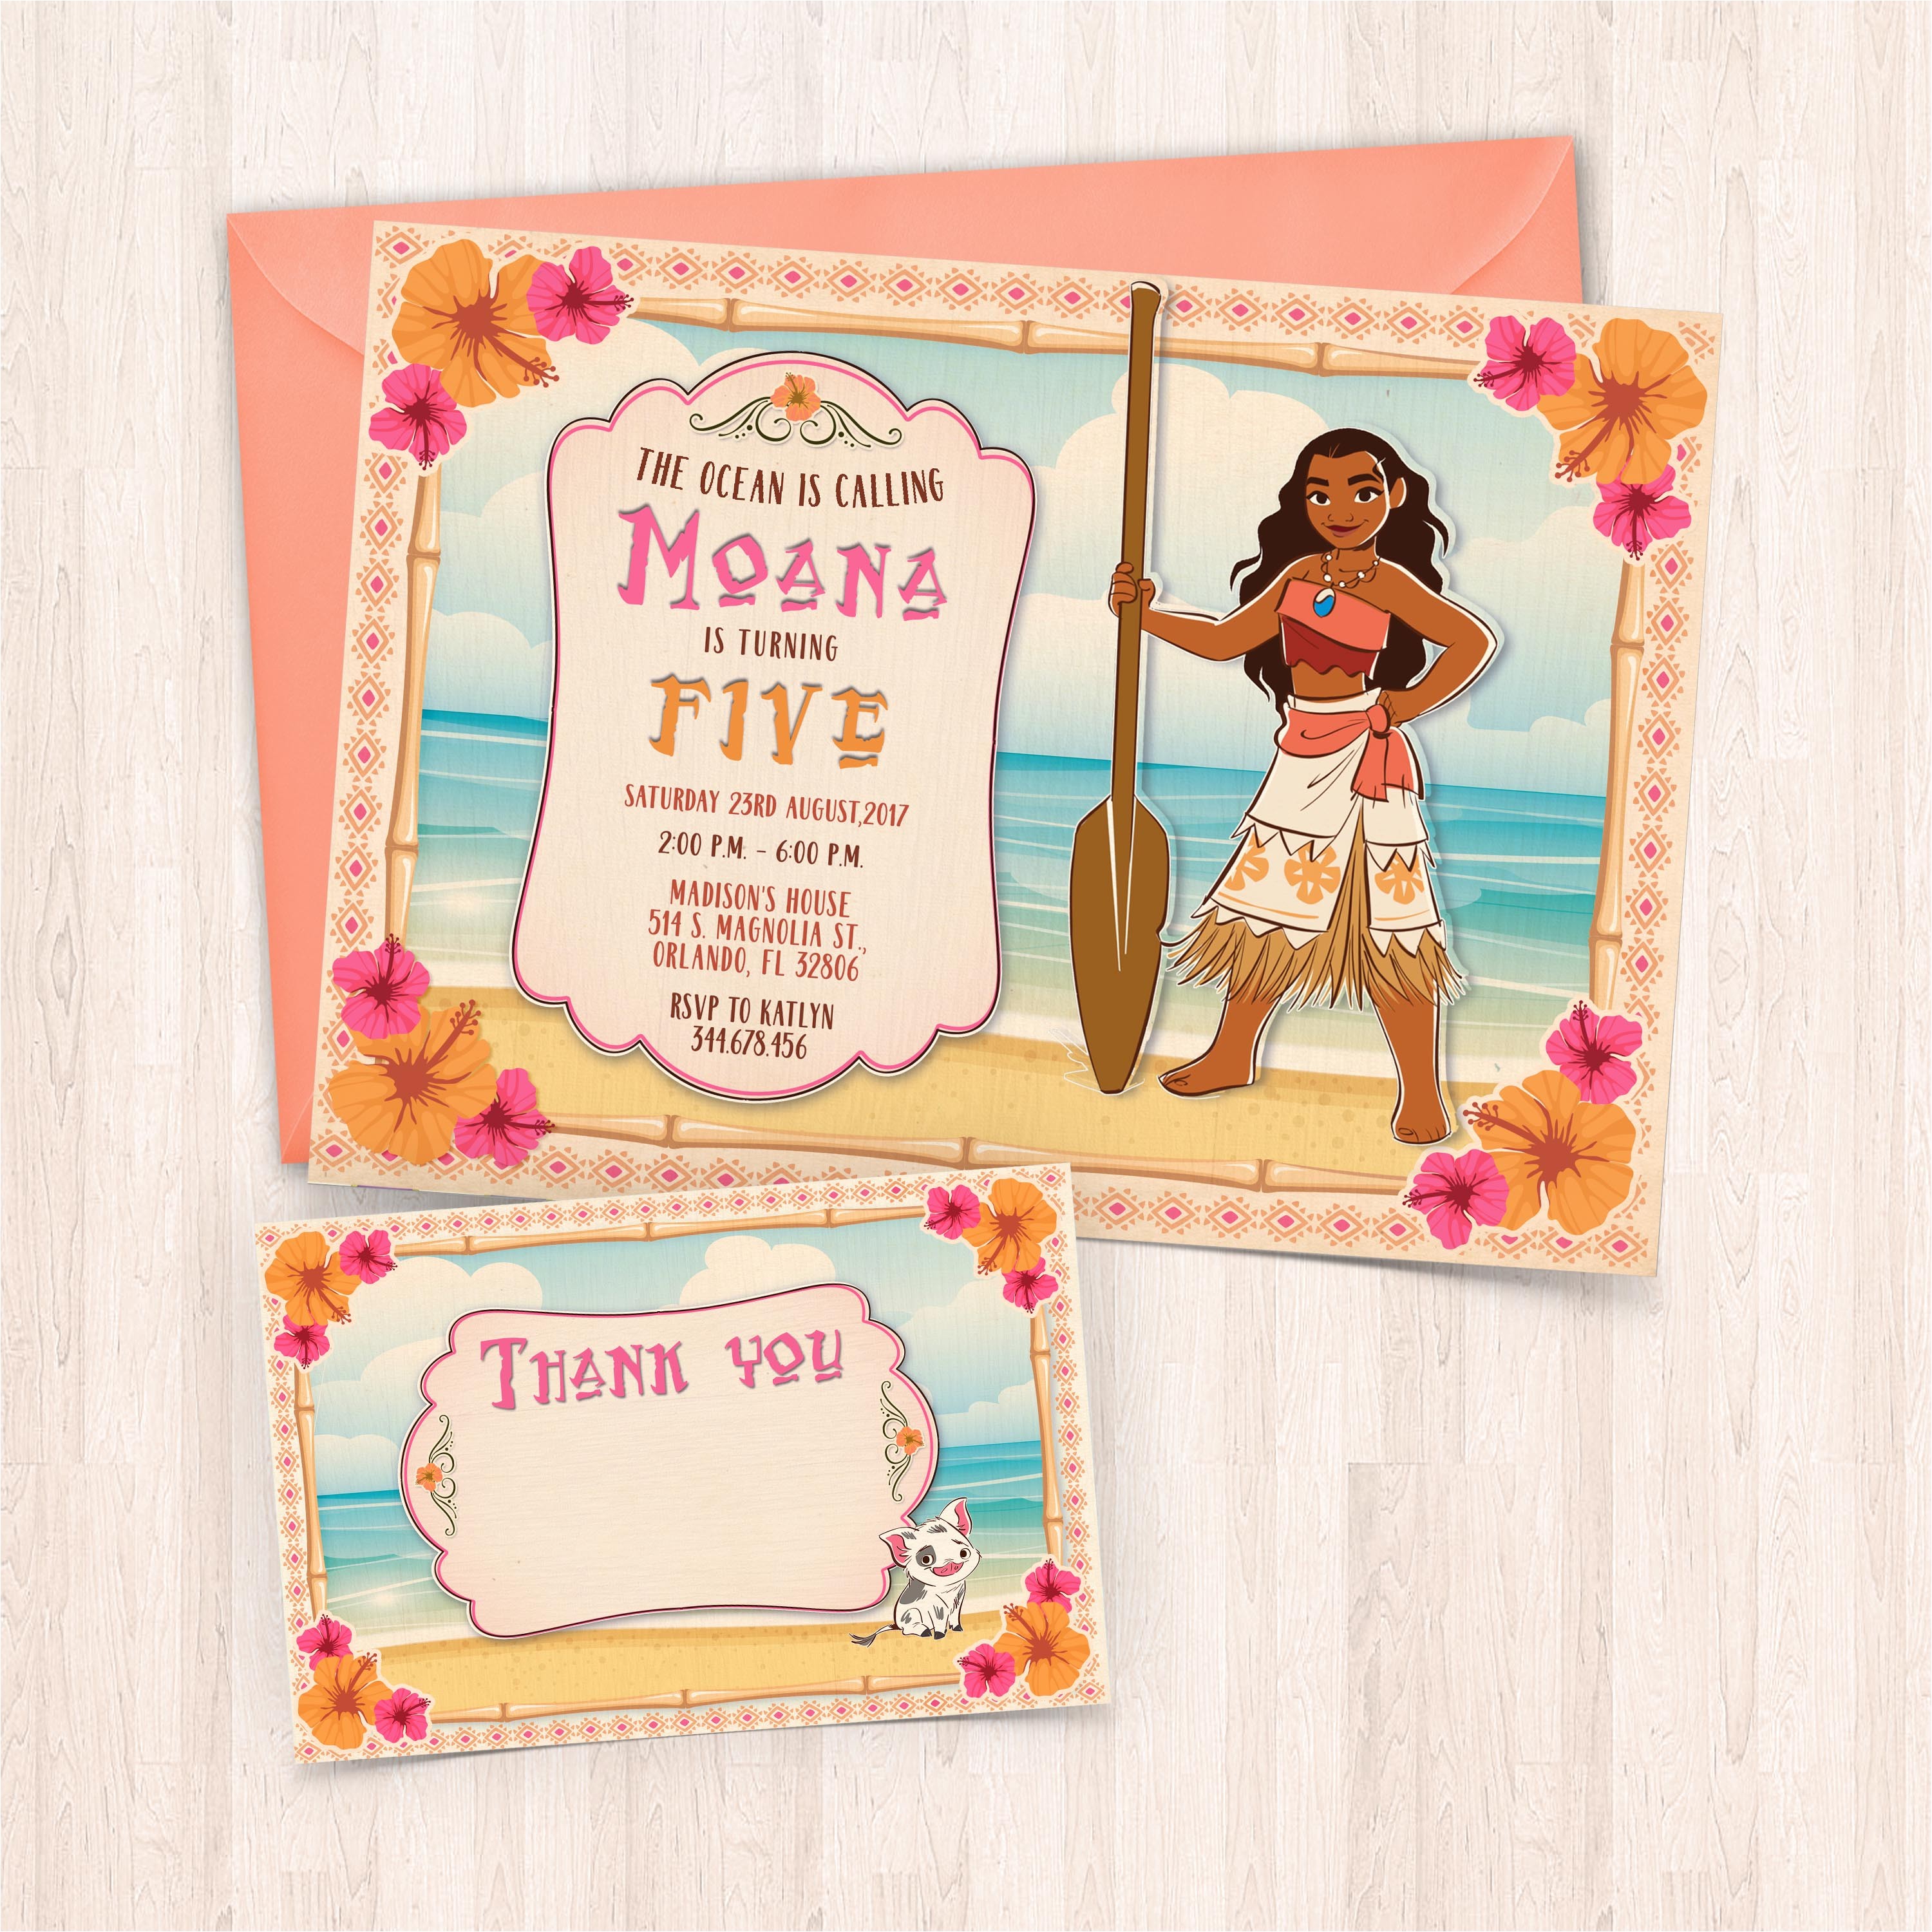 printable moana birthday invitations free thank you cards to print at home